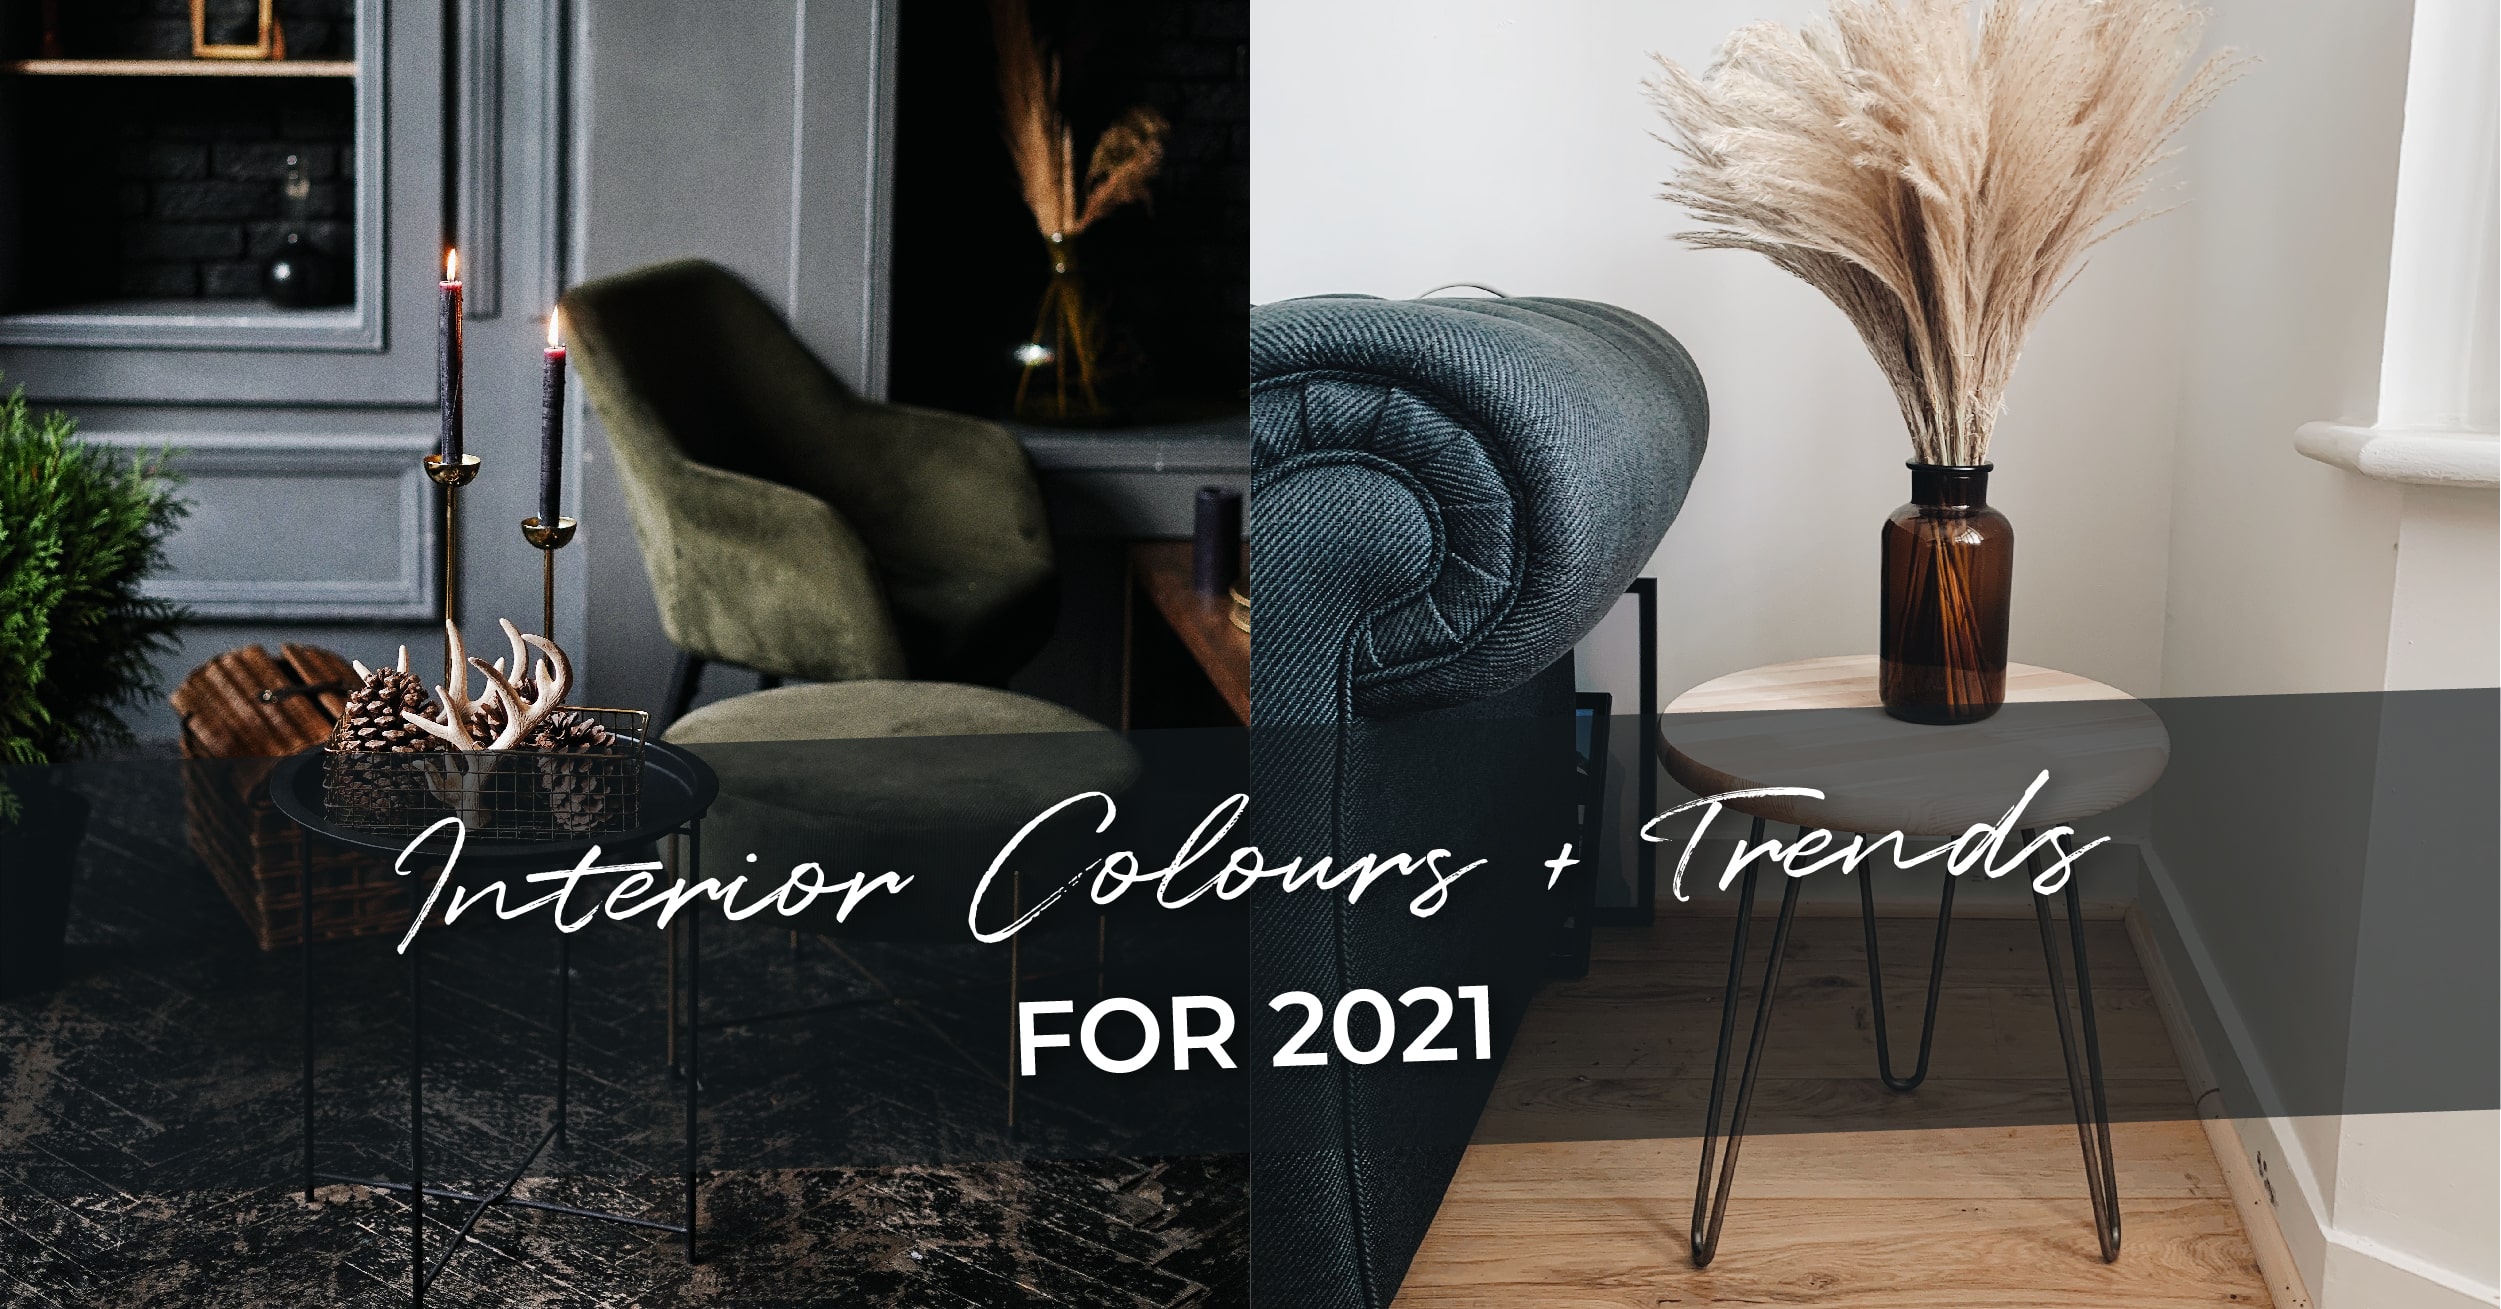 Interior Colours & Trends for 2021